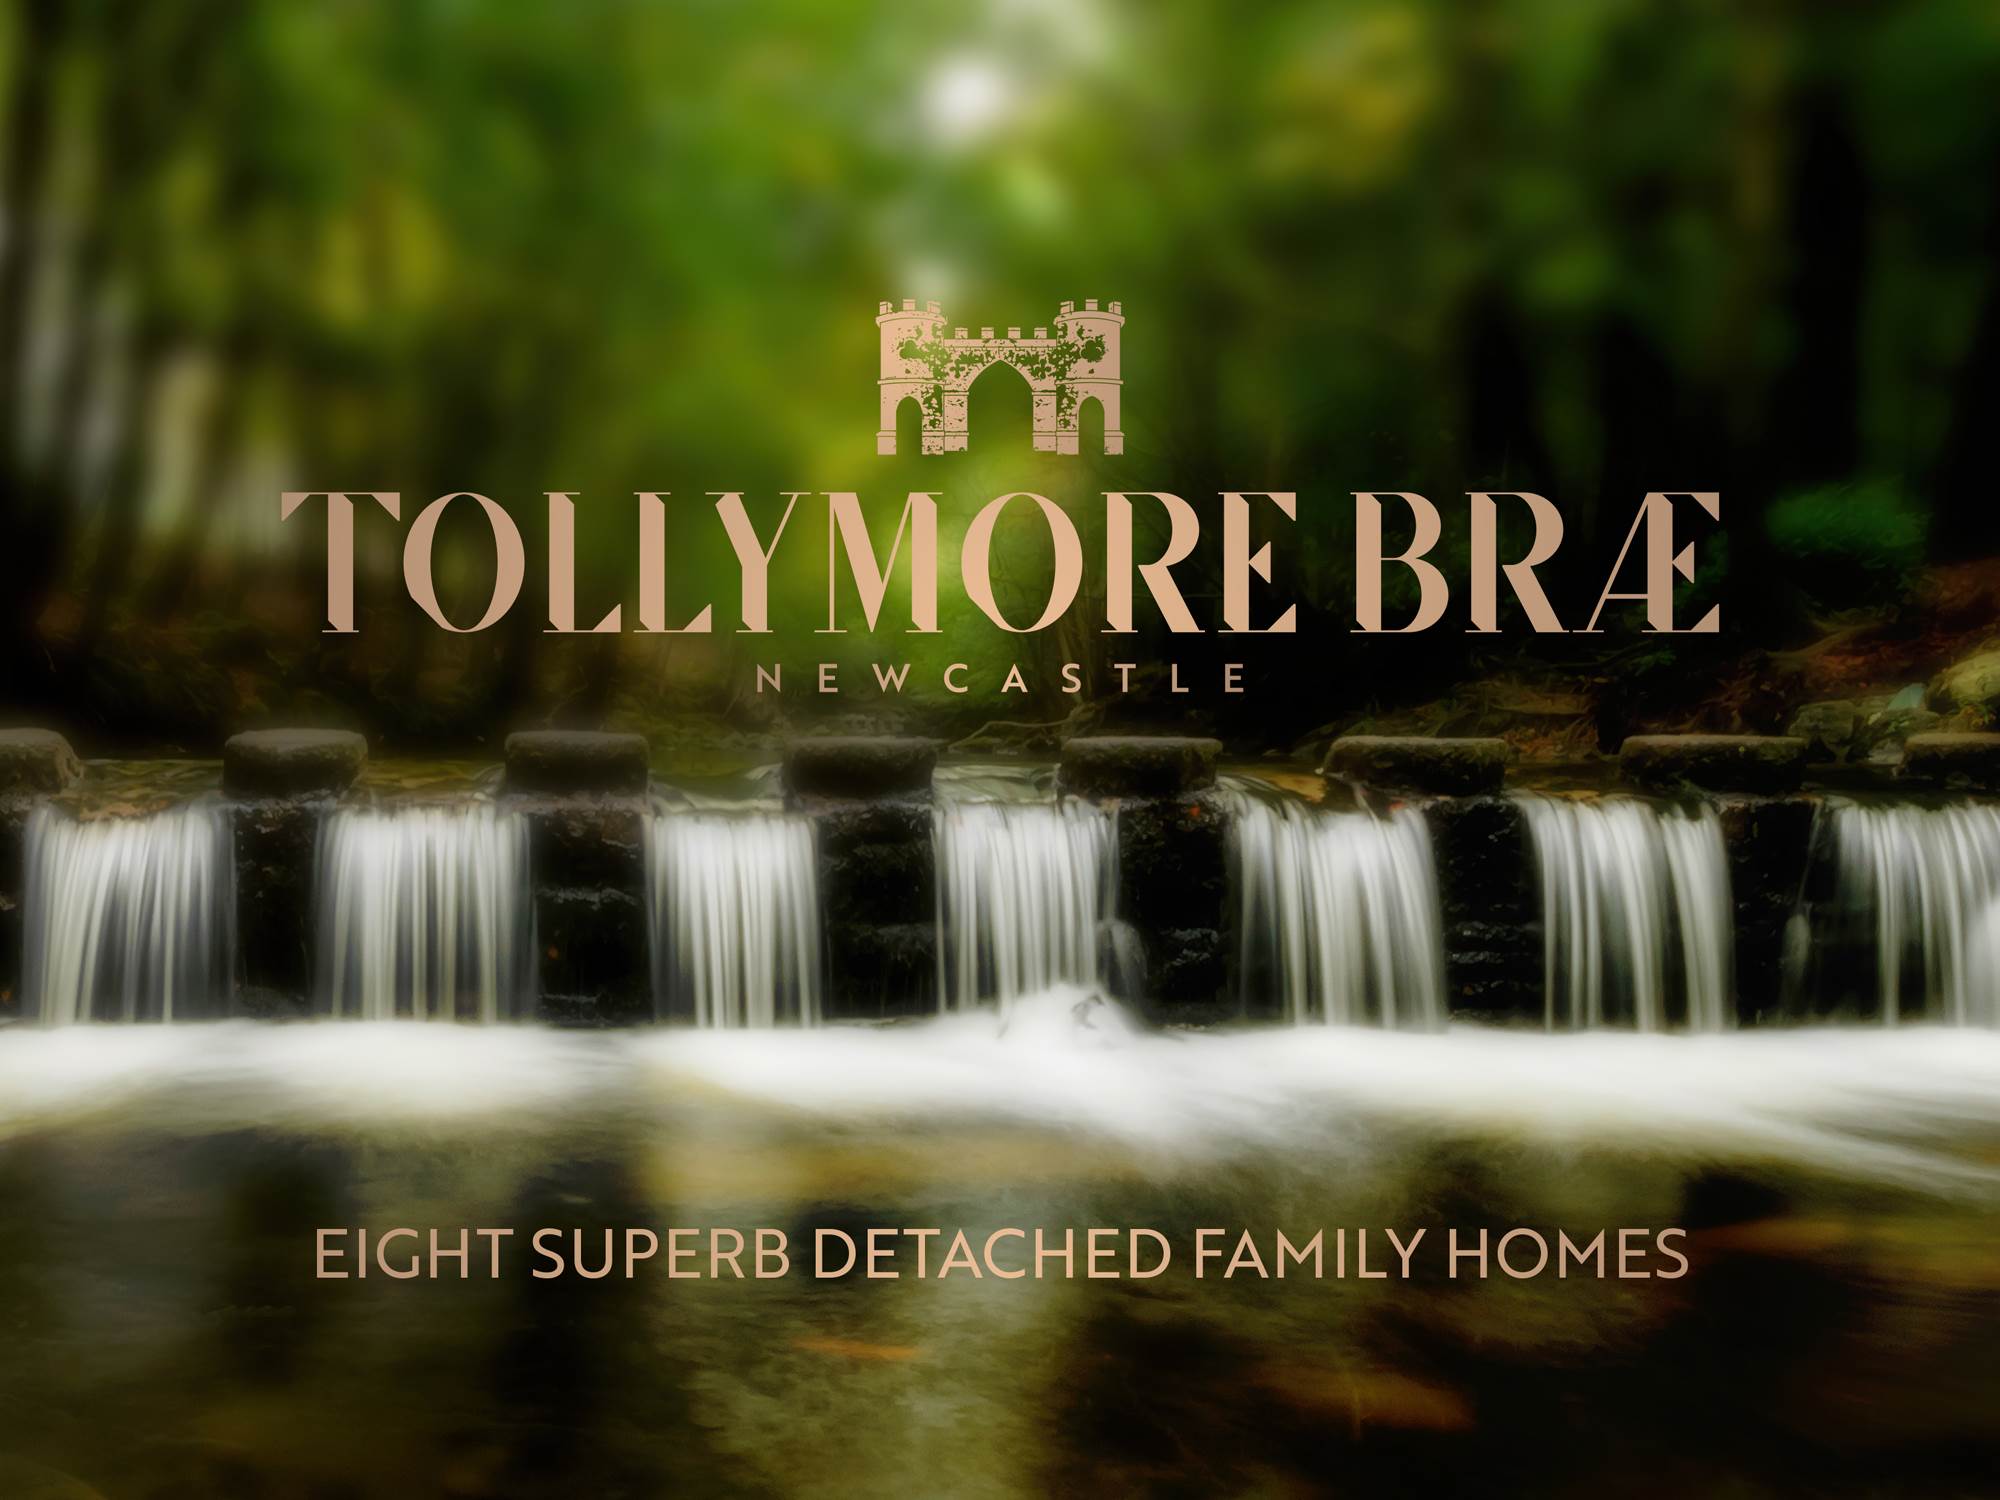 Site 1 Tollymore Brae